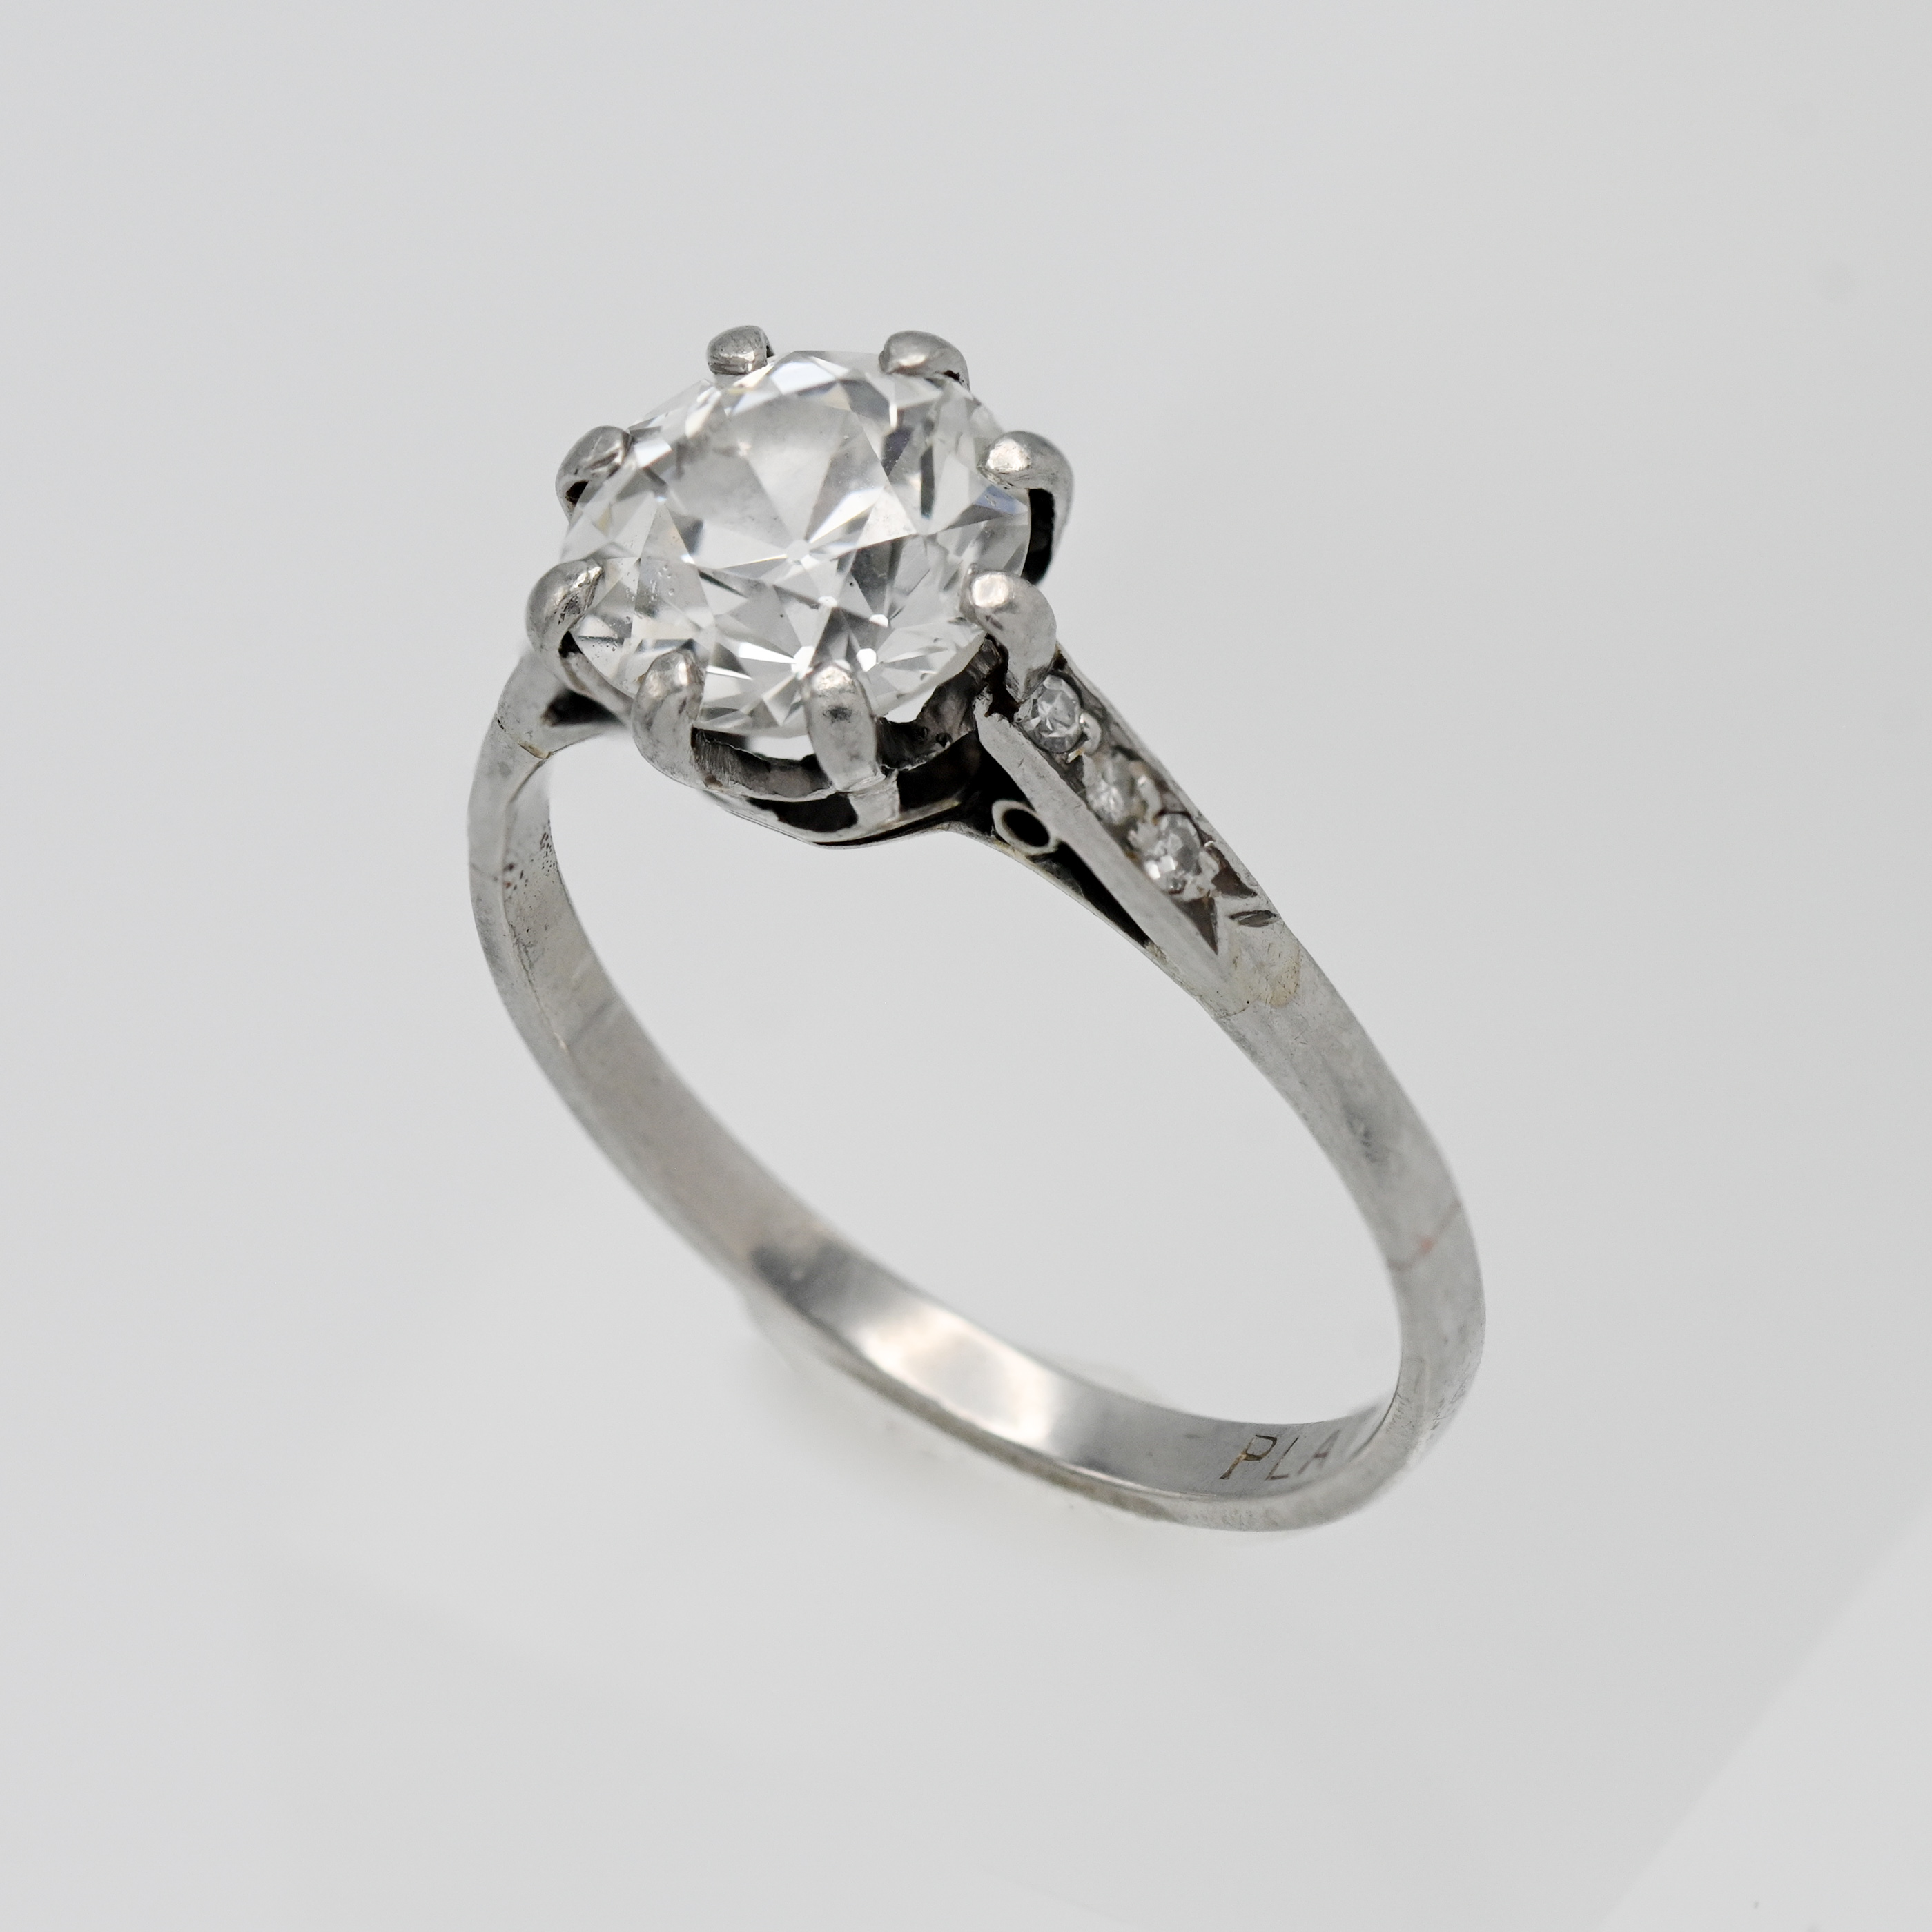 A fine diamond and platinum solitaire ring, set with an old brilliant cut diamond - Image 3 of 5